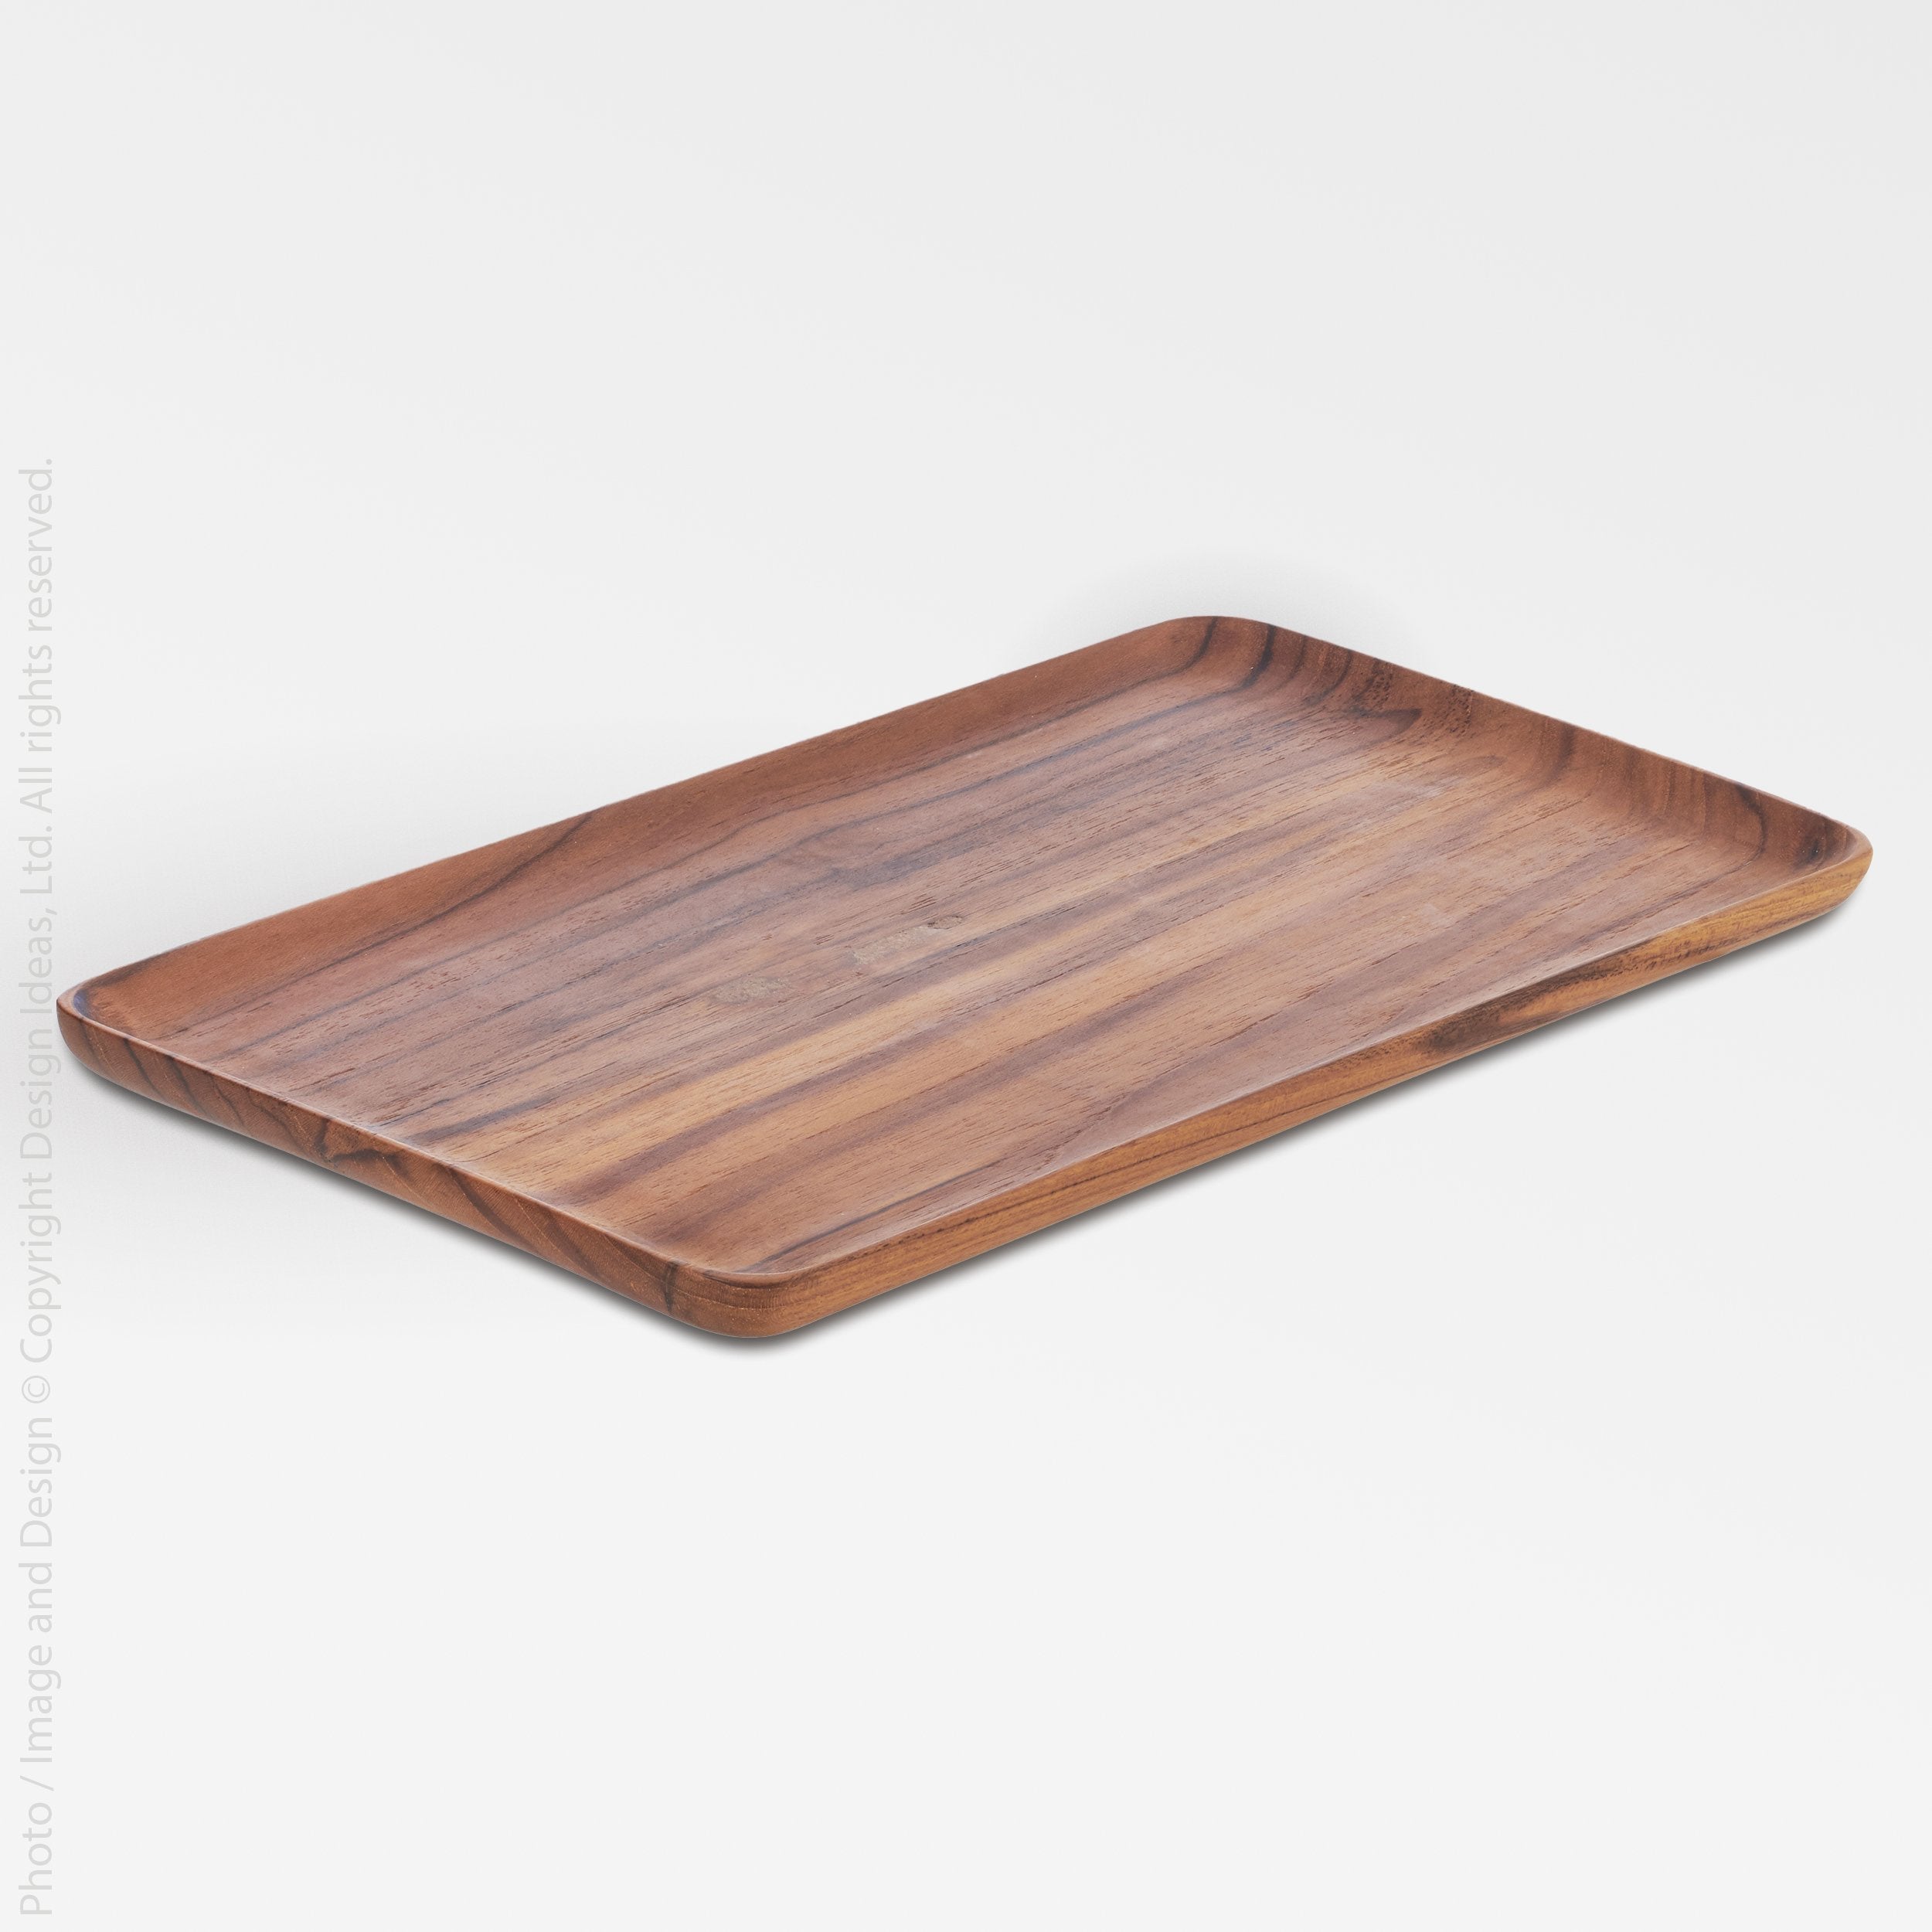 Chiku Teak Serving Tray - Clear Color | Image 1 | From the Chiku Collection | Skillfully assembled with natural teak for long lasting use | This tray is sustainably sourced | Available in natural color | texxture home